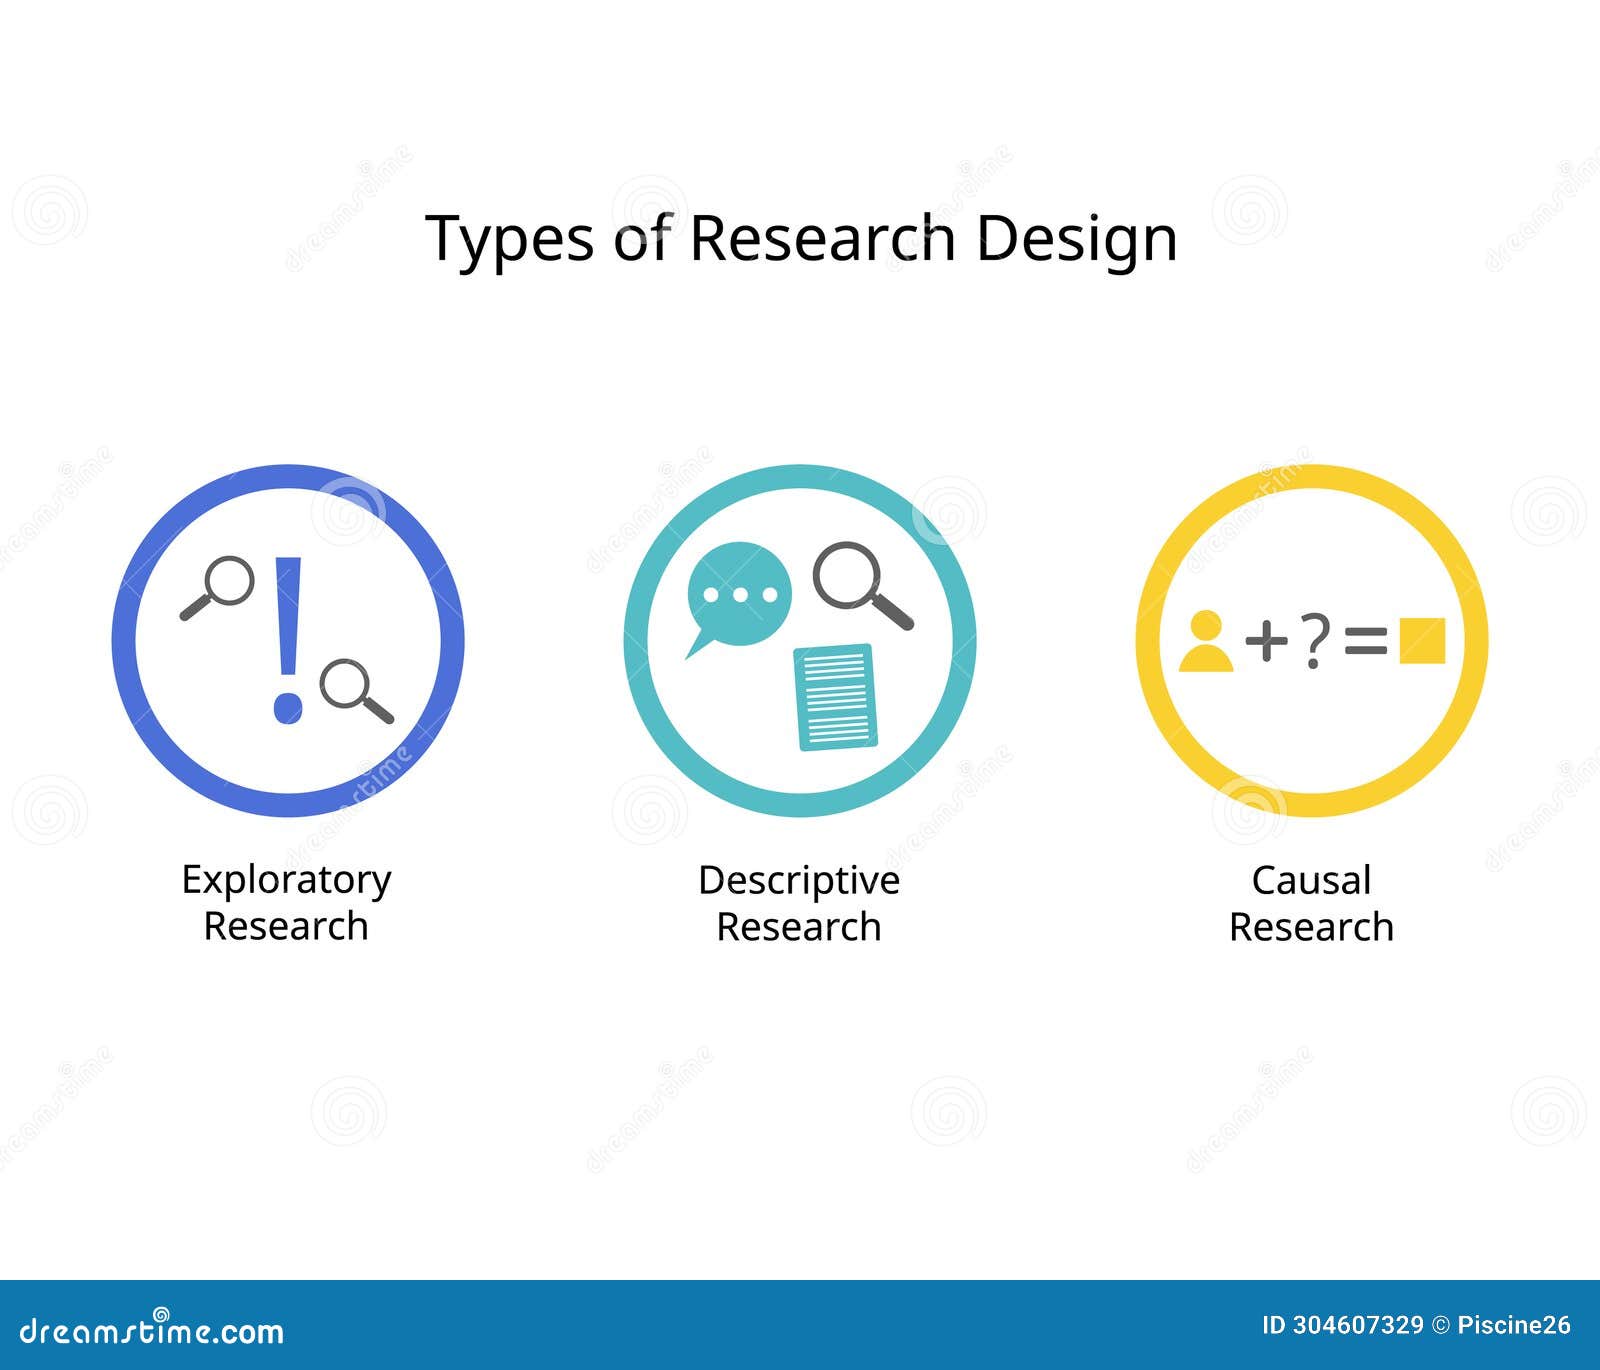 conducting market research with three main type for exploratory research, descriptive, and causal research